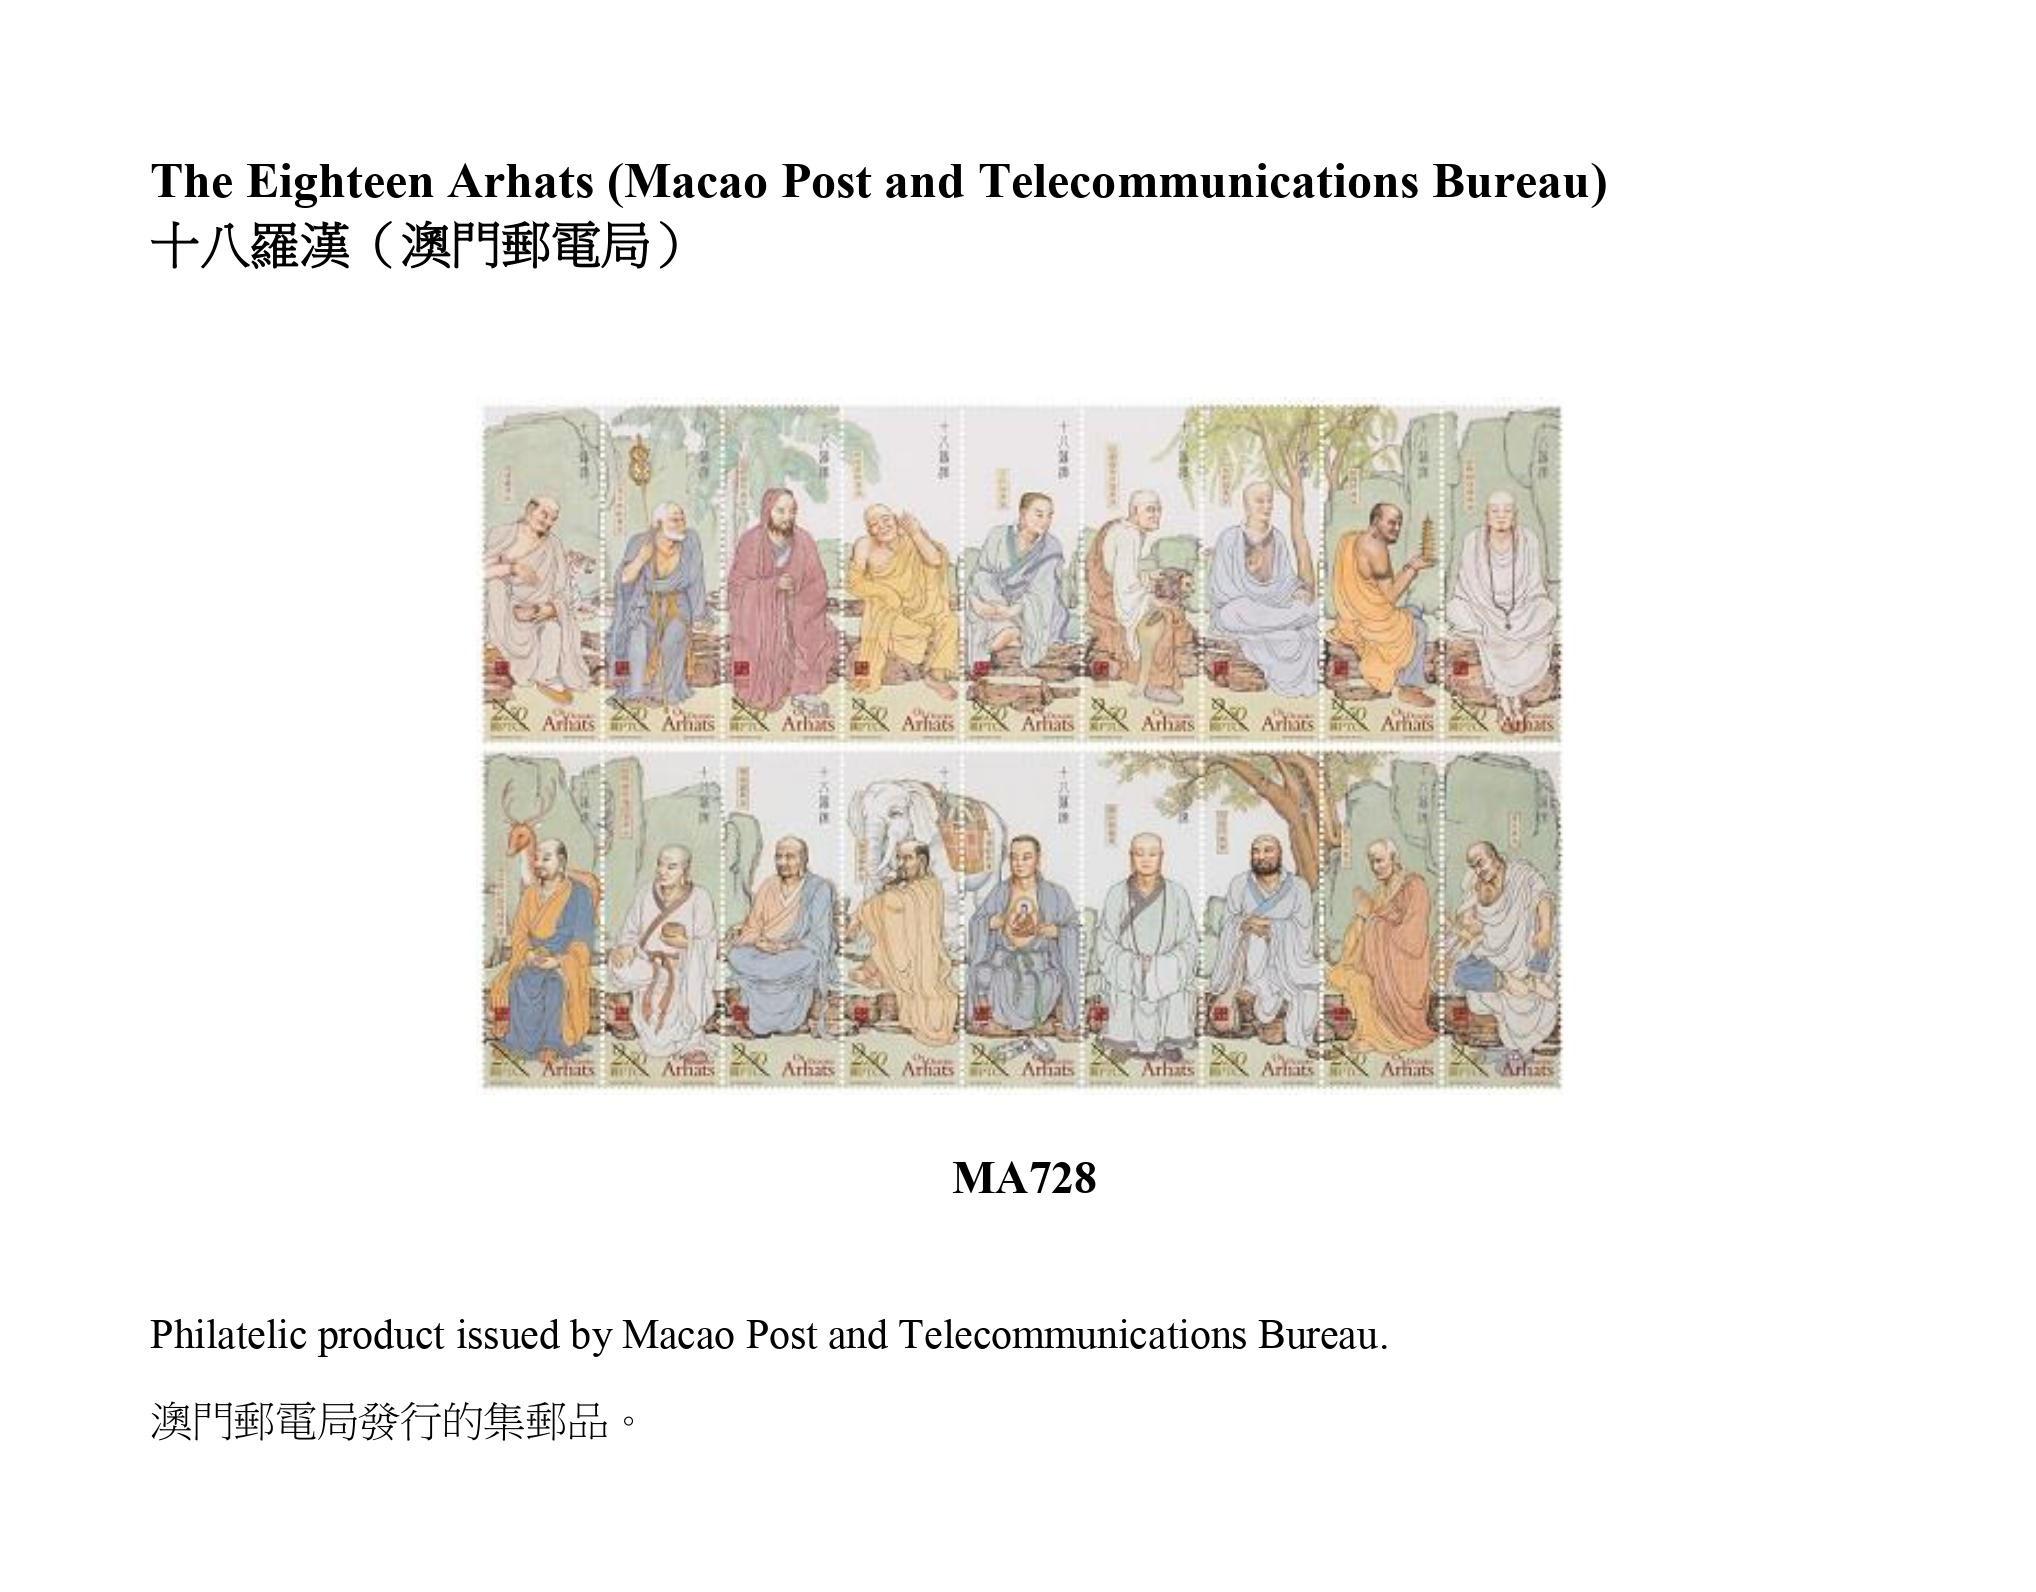 Hongkong Post announced today (January 13) that selected philatelic products issued by China Post, Macao Post and Telecommunications Bureau, Isle of Man Post Office and Royal Mail will be available for online sale from January 17 (Tuesday). Picture shows the philatelic product issued by Macao Post and Telecommunications Bureau.

